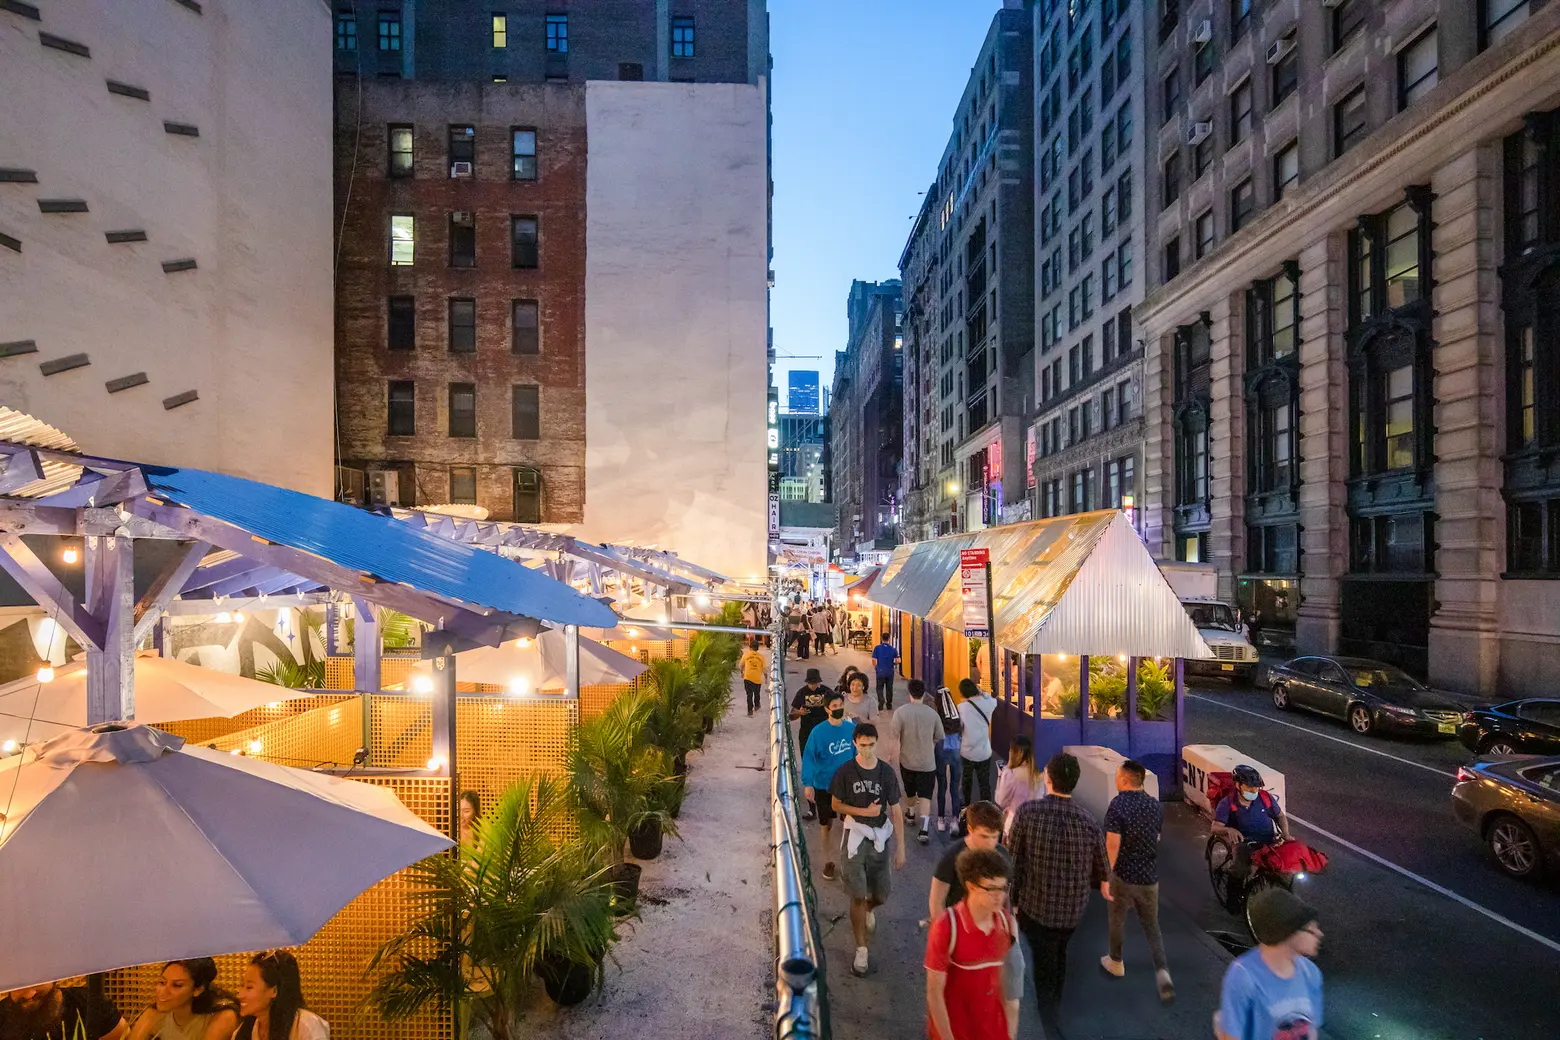 Here are the ‘Alfresco Award’ winners for NYC’s best open streets and outdoor dining spots